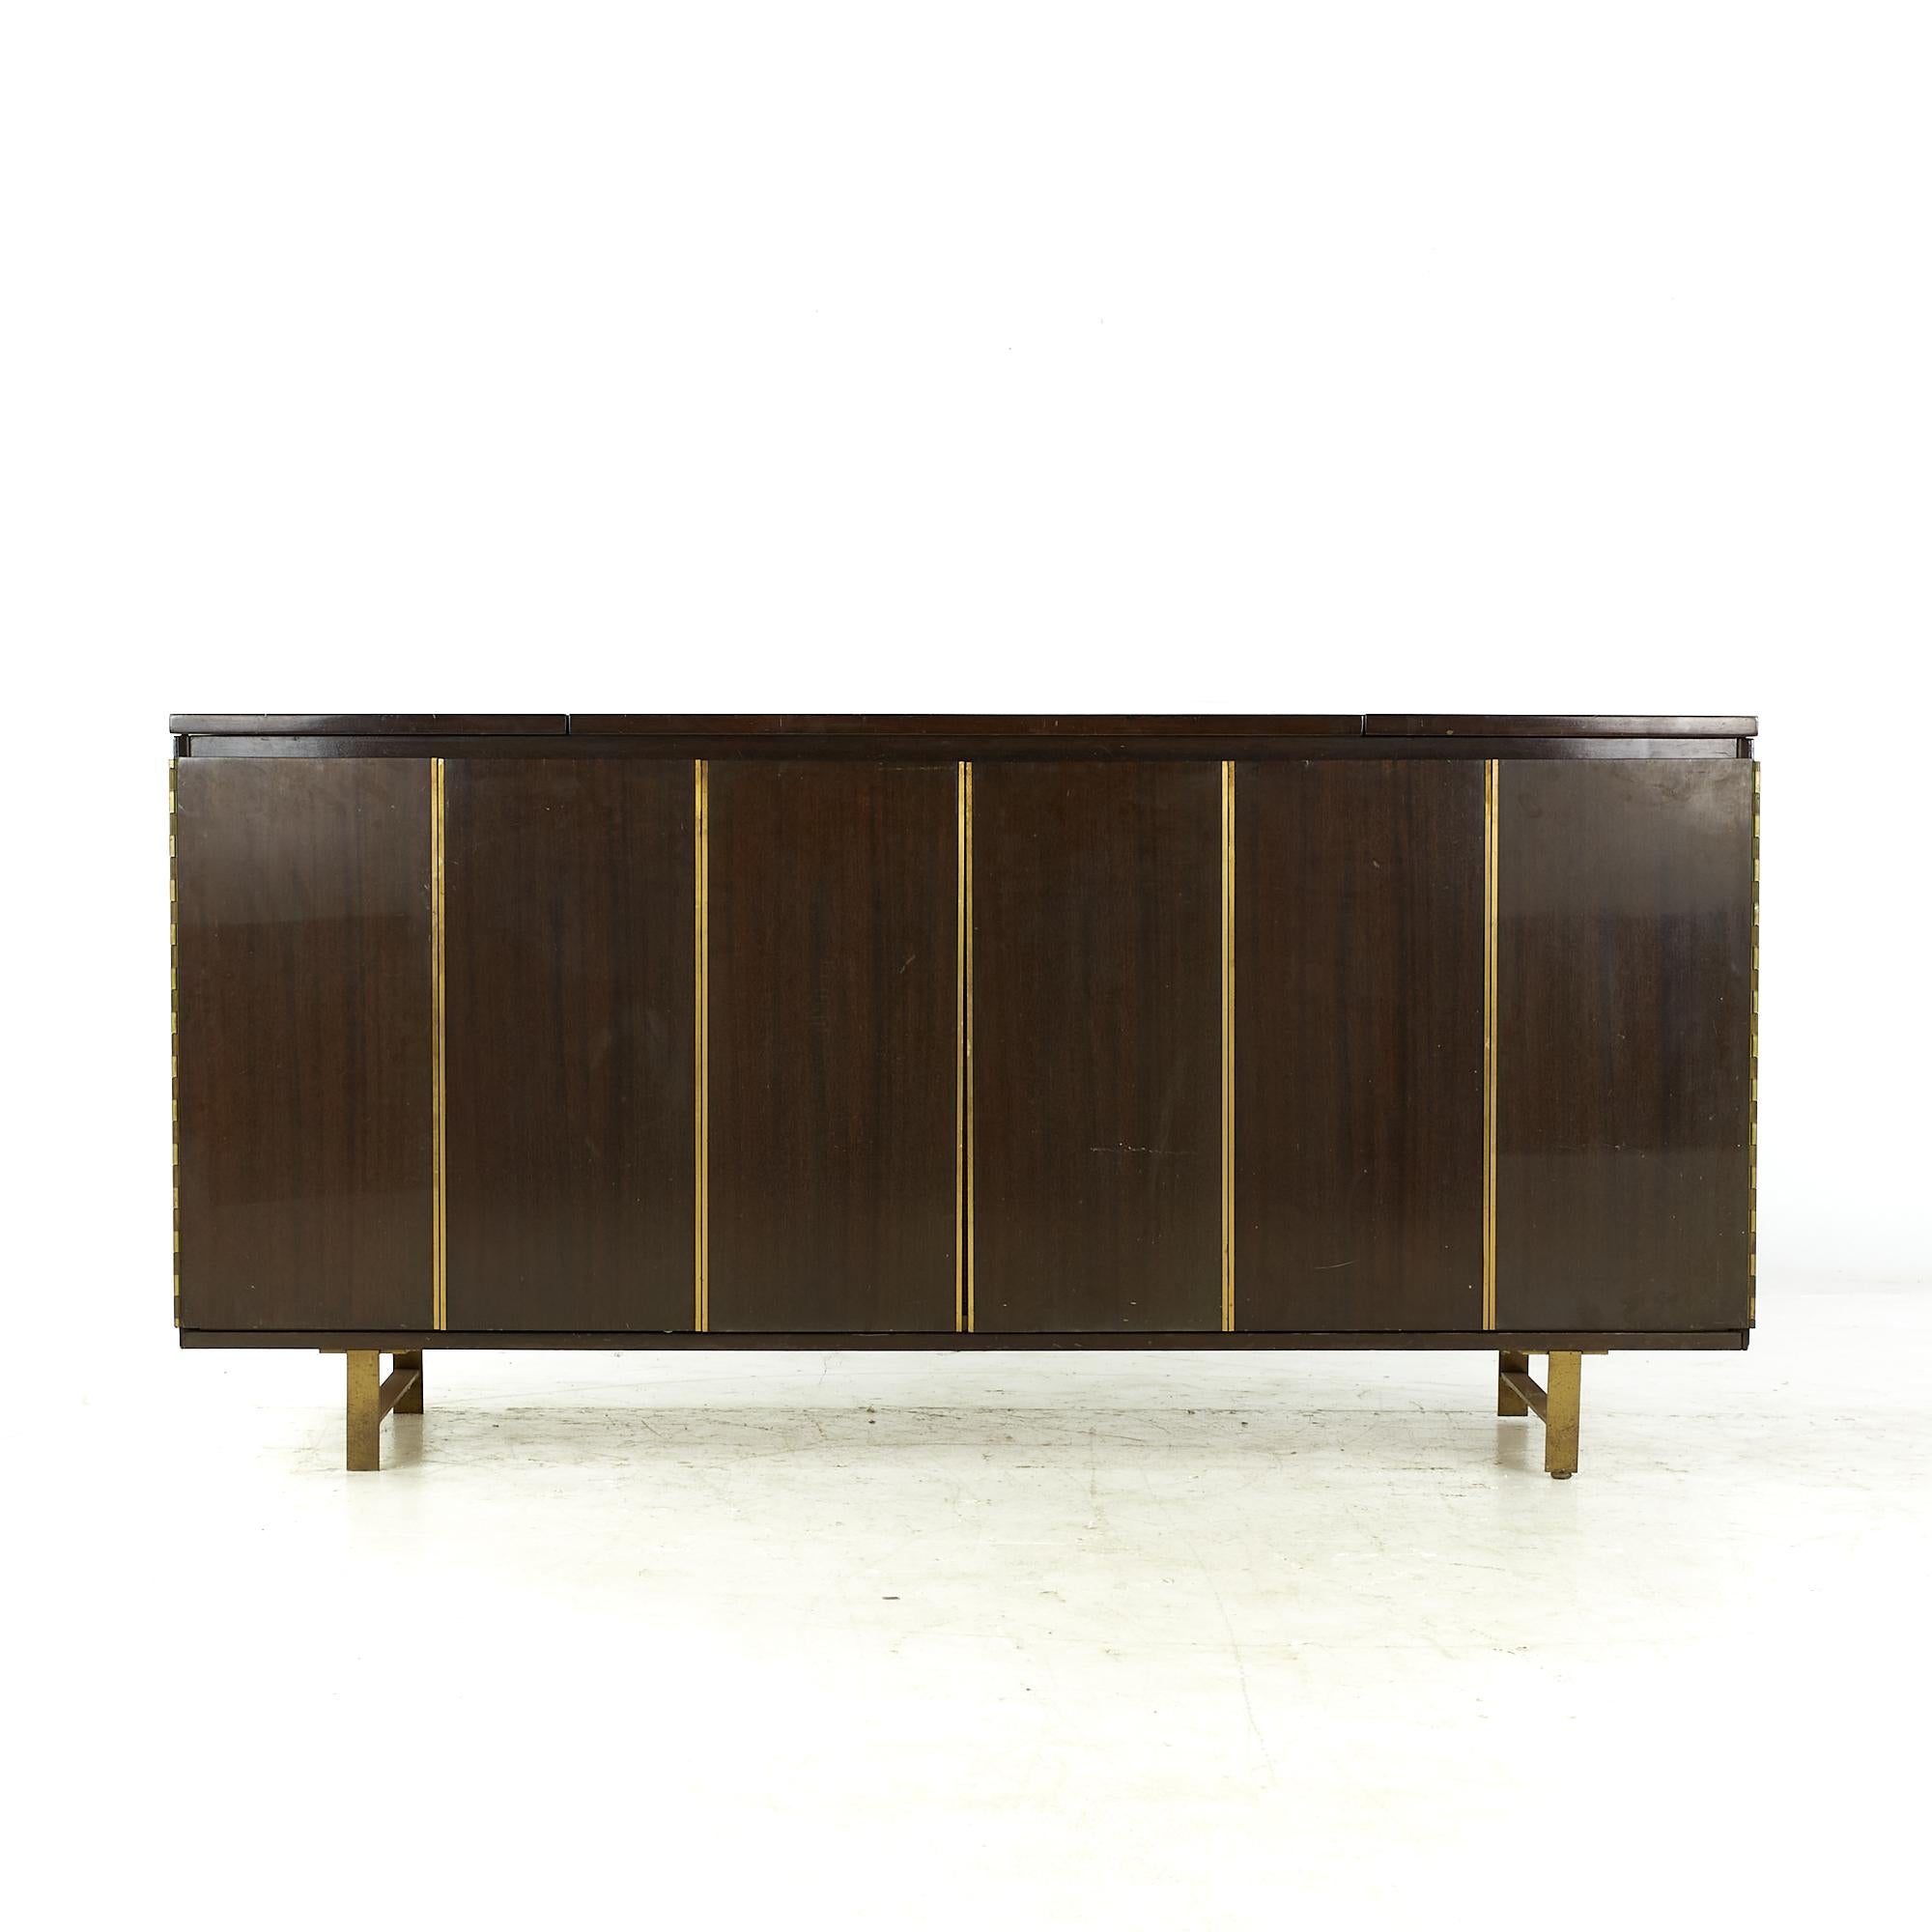 Paul McCobb for Bell & Howell midcentury Hi-Fi radio console.

This console measures: 72 wide x 19 deep x 34.75 inches high.

All pieces of furniture can be had in what we call restored vintage condition. That means the piece is restored upon